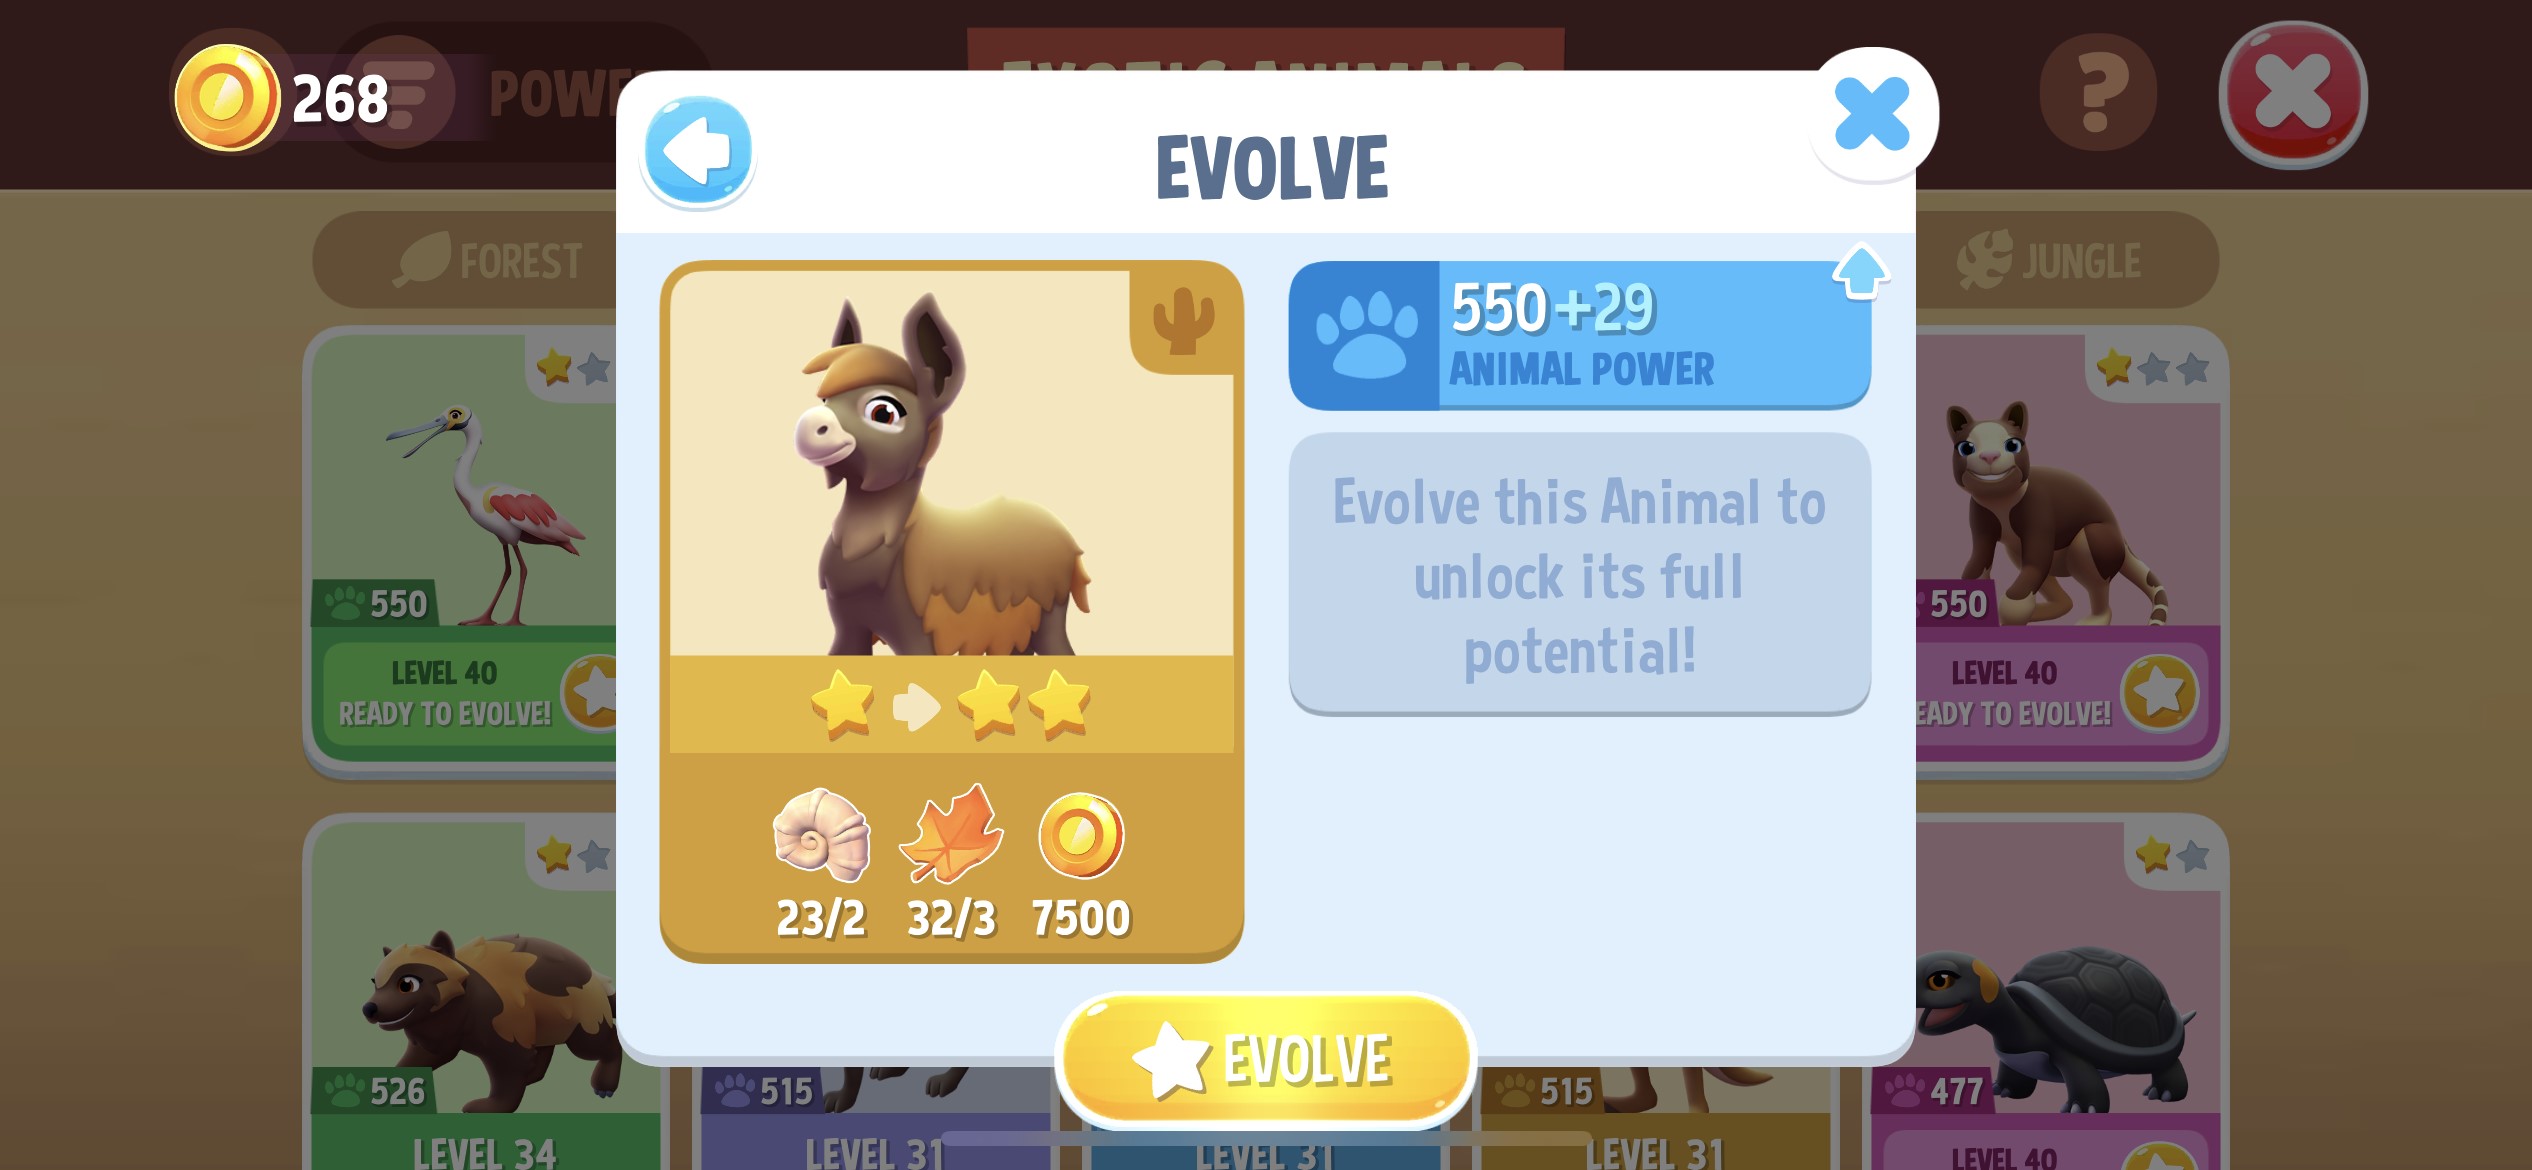 Remember to try and get the 4 star animals